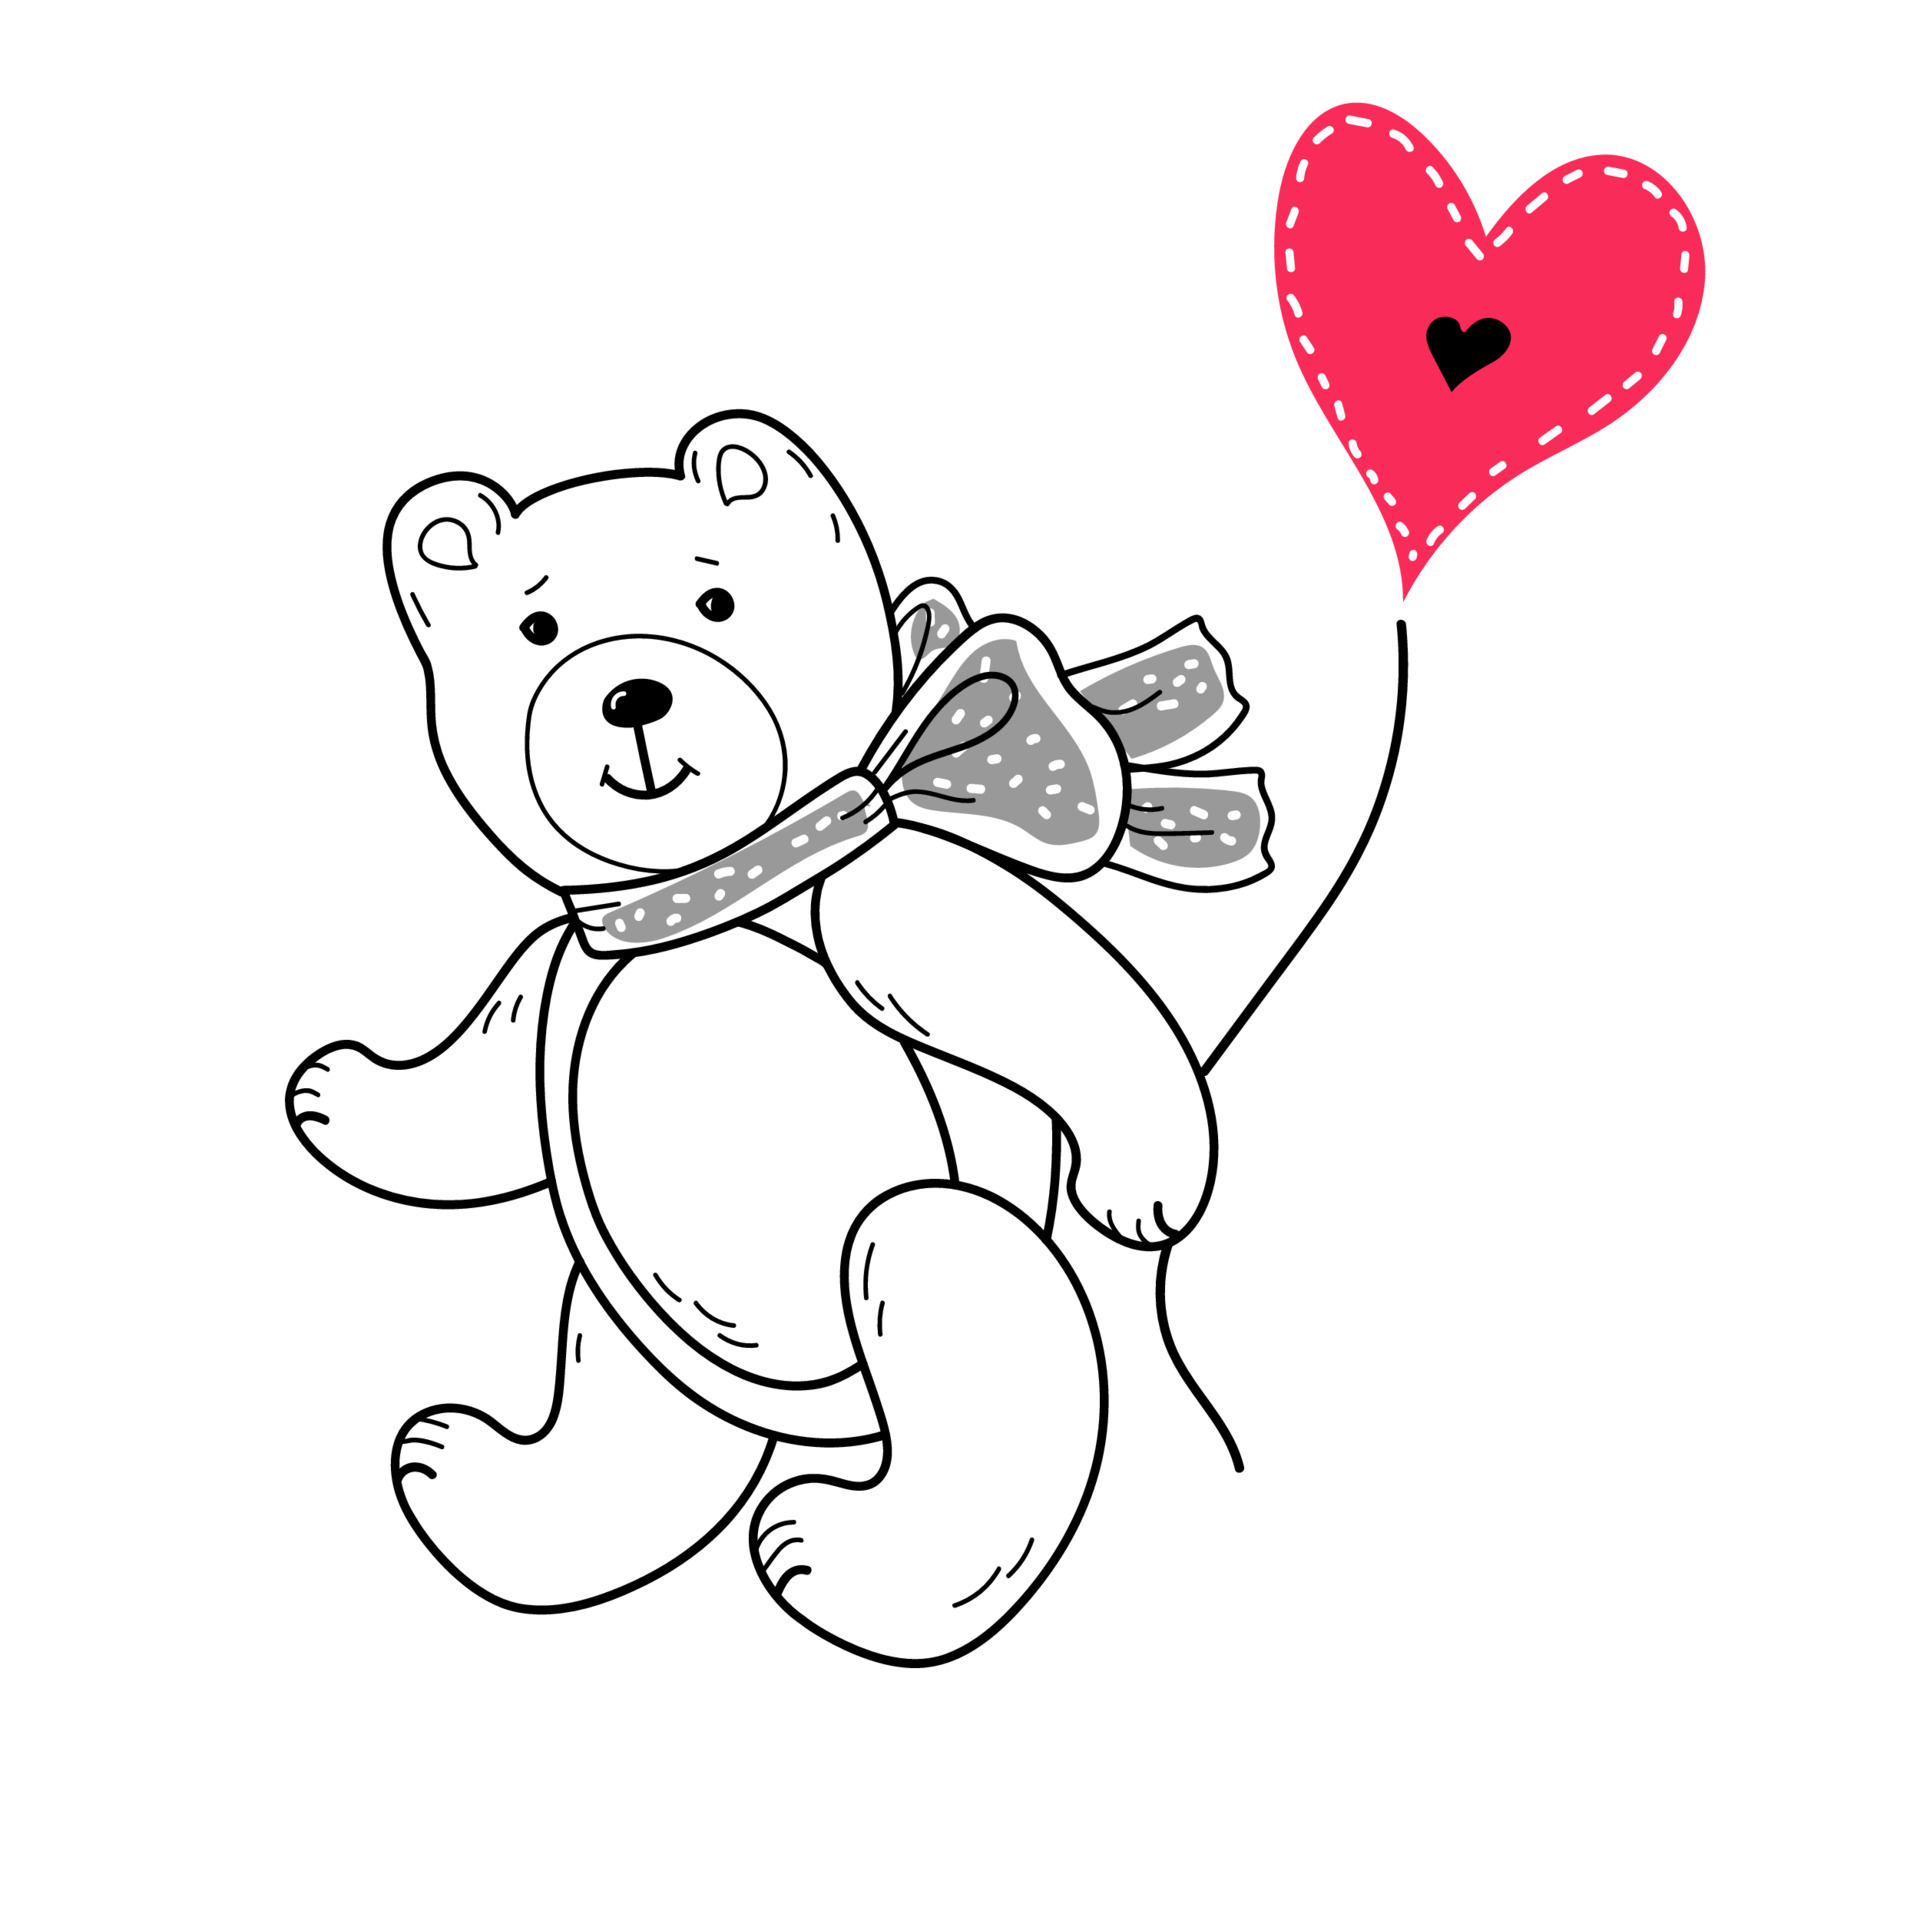 Buy The Drawing of Cute Teddy Bear With With Daisy Printable Art Online  in India  Etsy